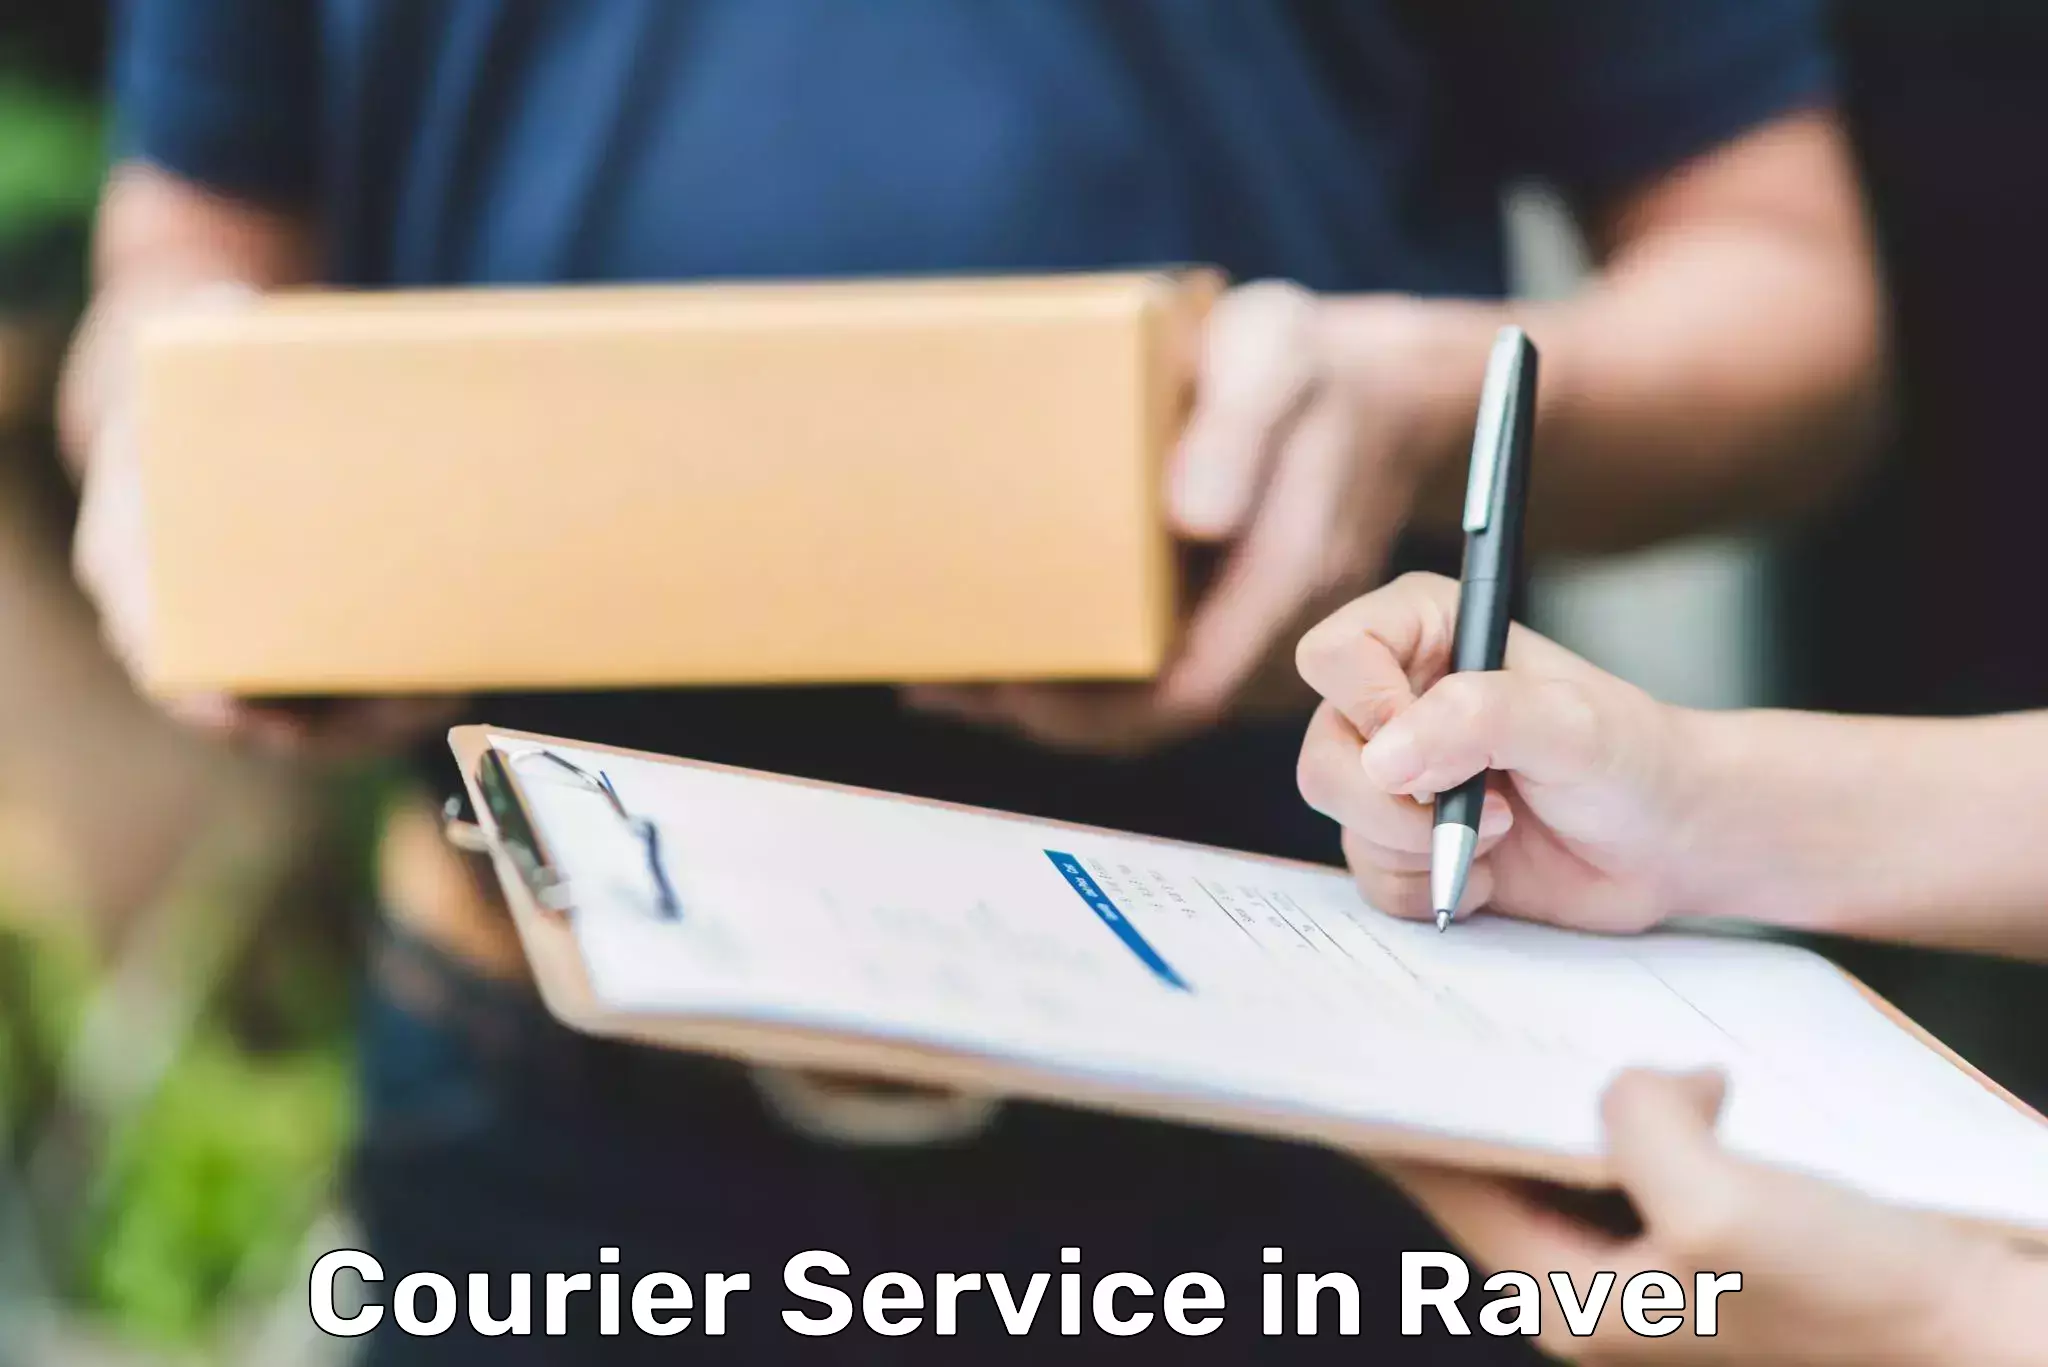 Advanced shipping network in Raver